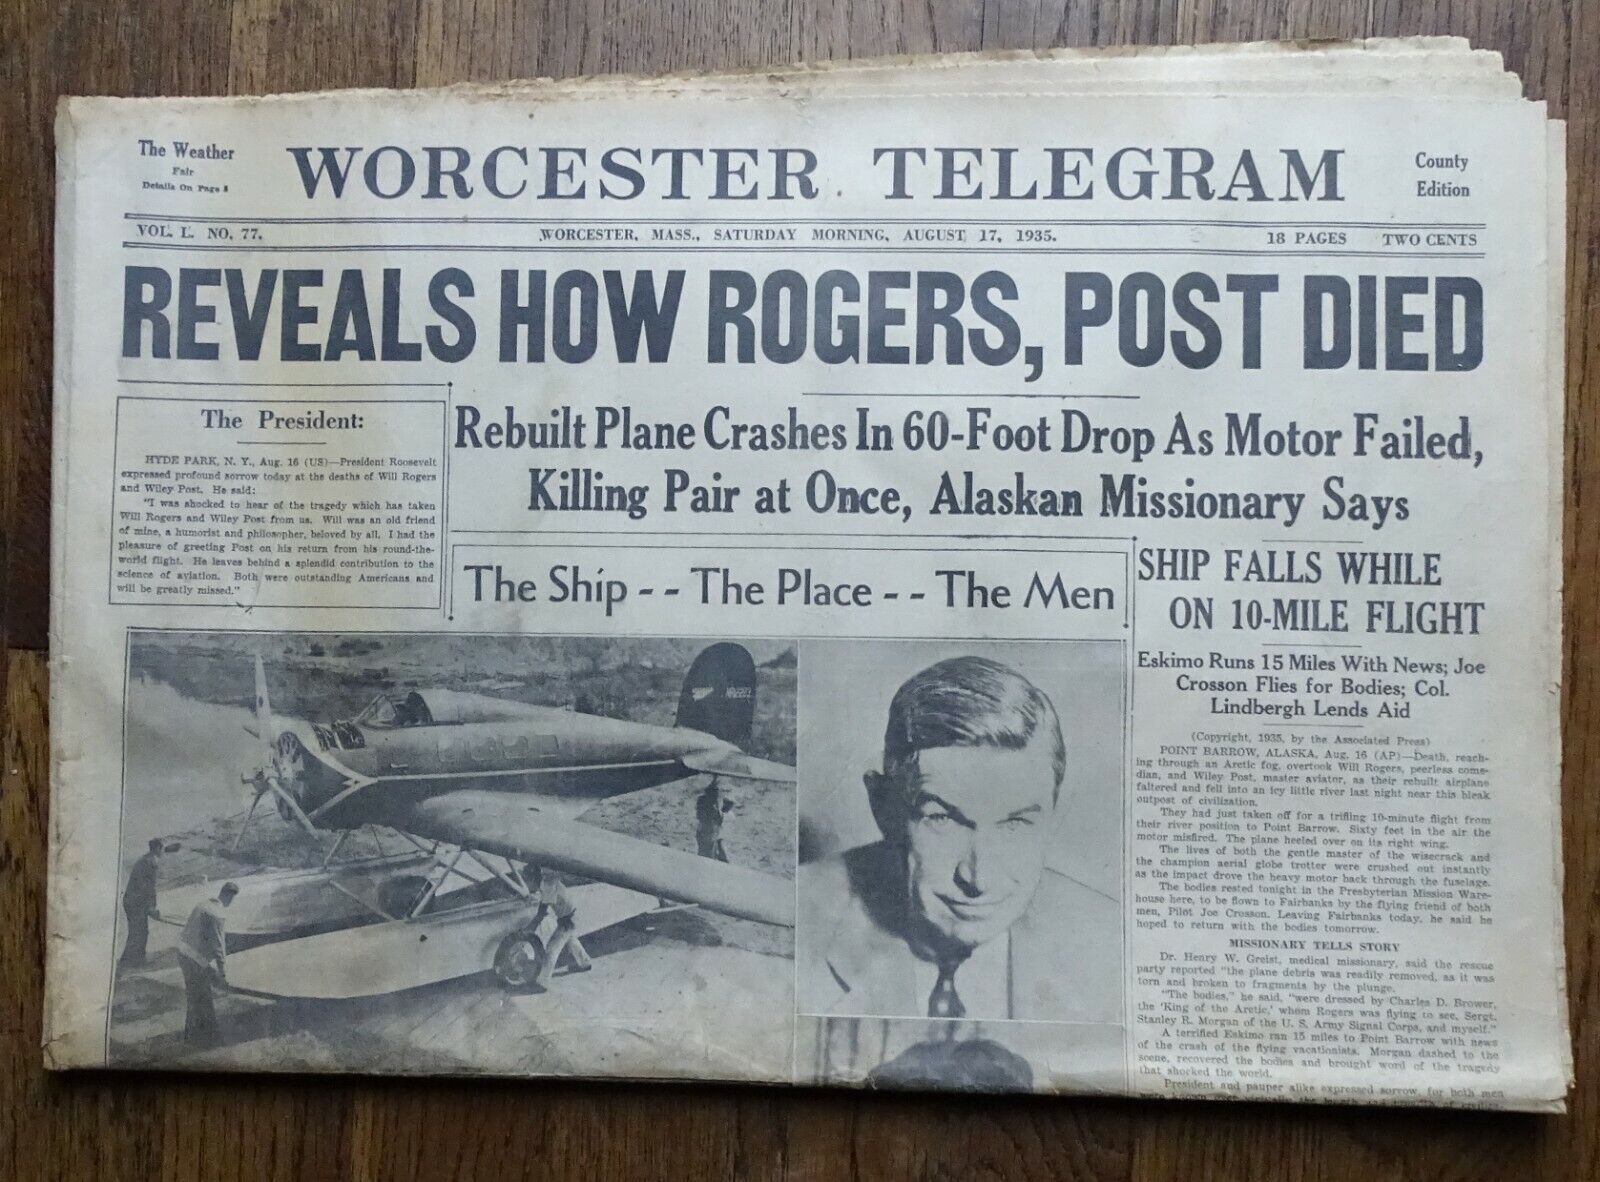 Will Rogers Wiley Post Dead - August 17 1935 Worcester MA Telegram (Newspaper)